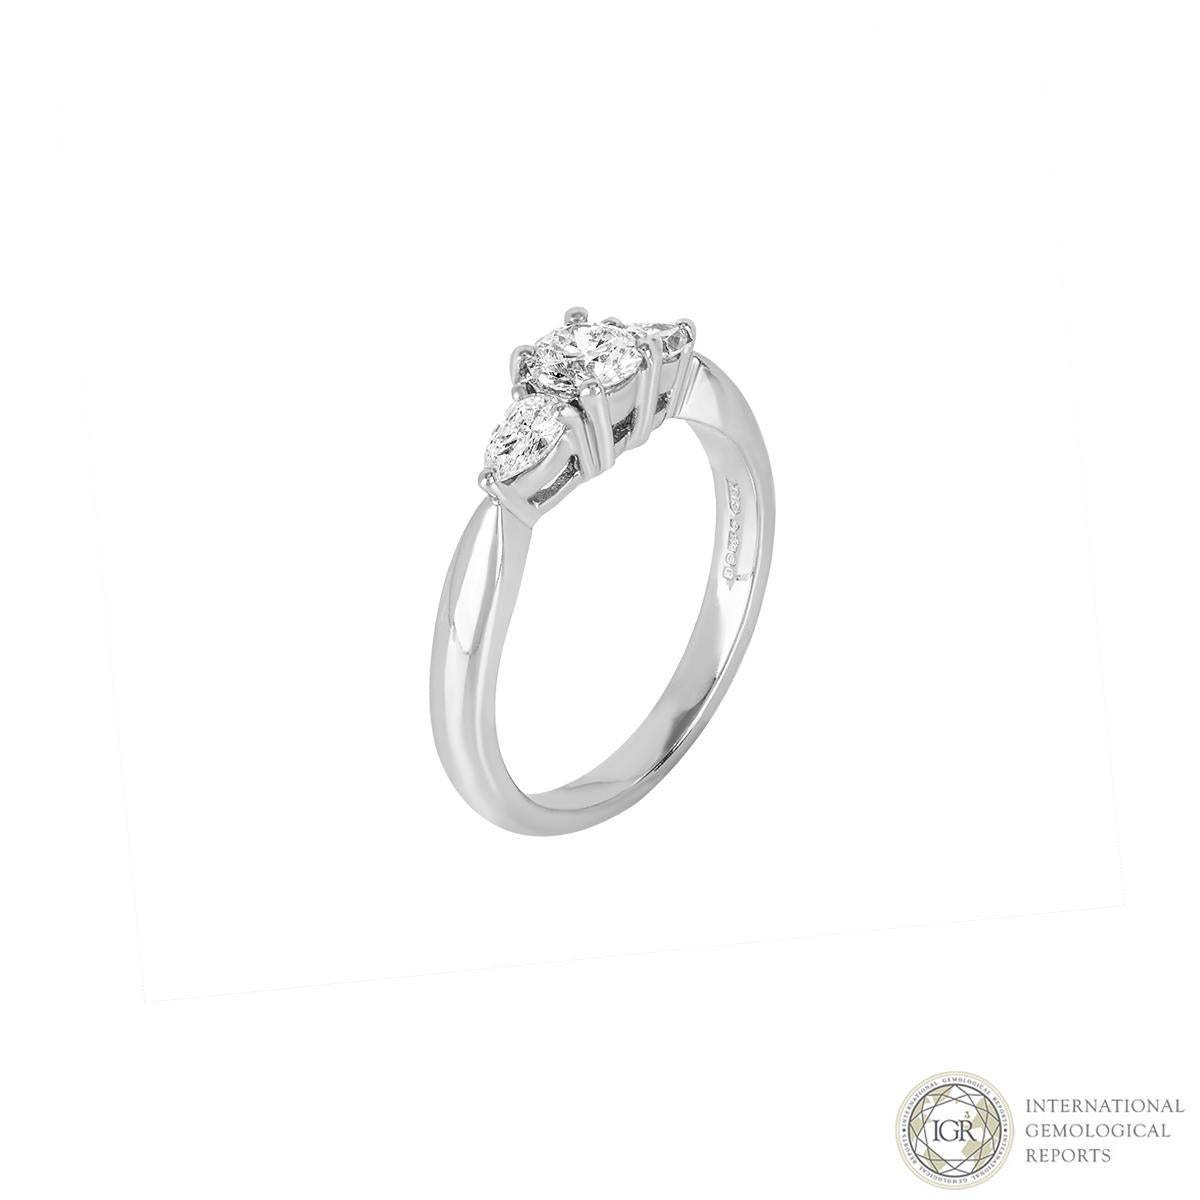 An elegant three stone diamond ring in platinum. The central round brilliant cut diamond weighs 0.37ct, G colour and SI2 clarity. The two pear shape side stones both weigh 0.14ct each well matched in colour and clarity to the central diamond. The